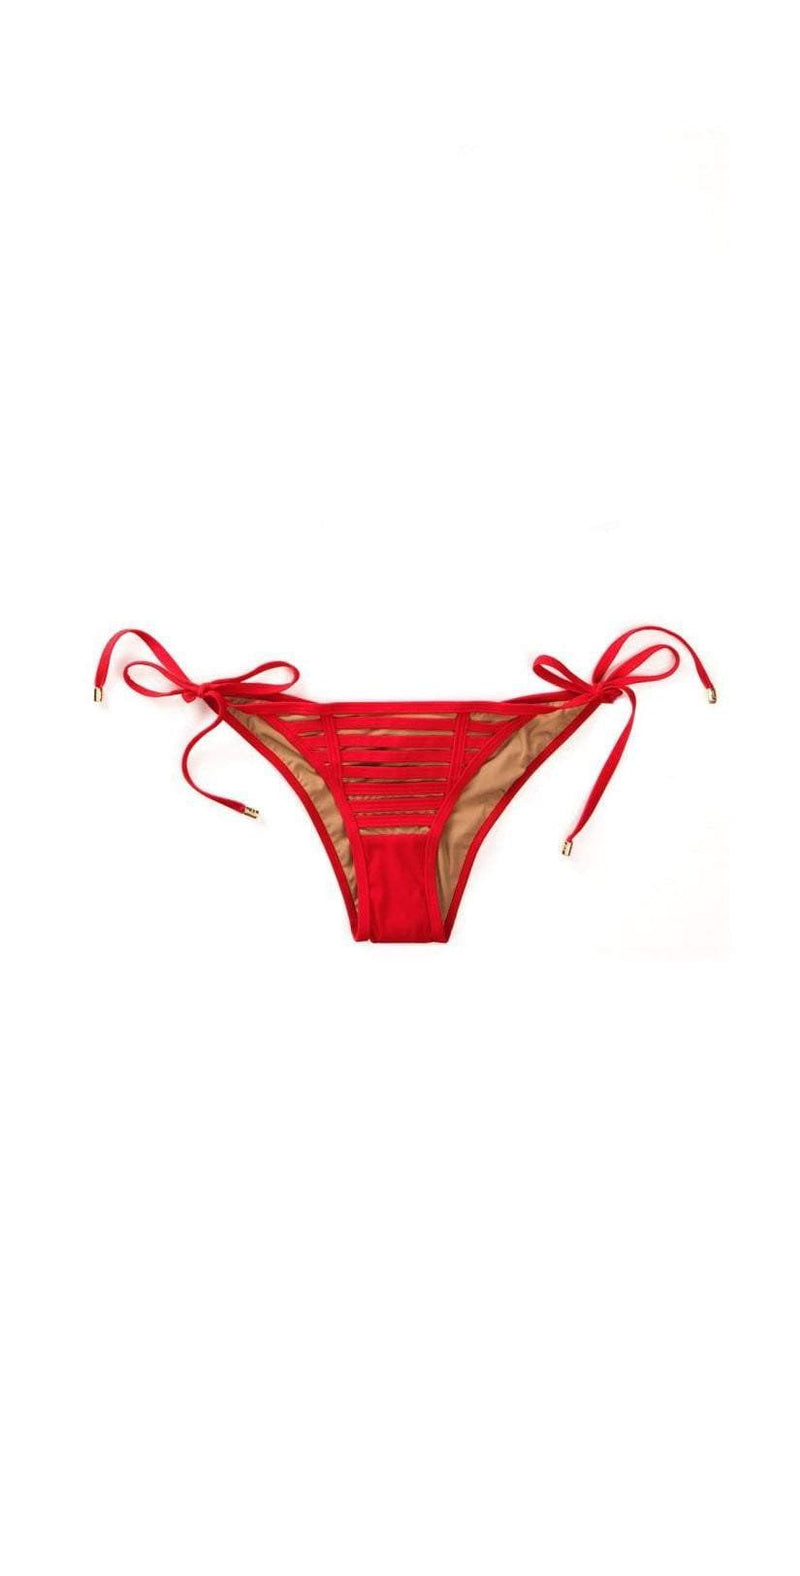 South Beach Swimsuits Beach Bunny Hard Summer Tie Side Skimpy Bottom in Red  – South Beach Swimsuits